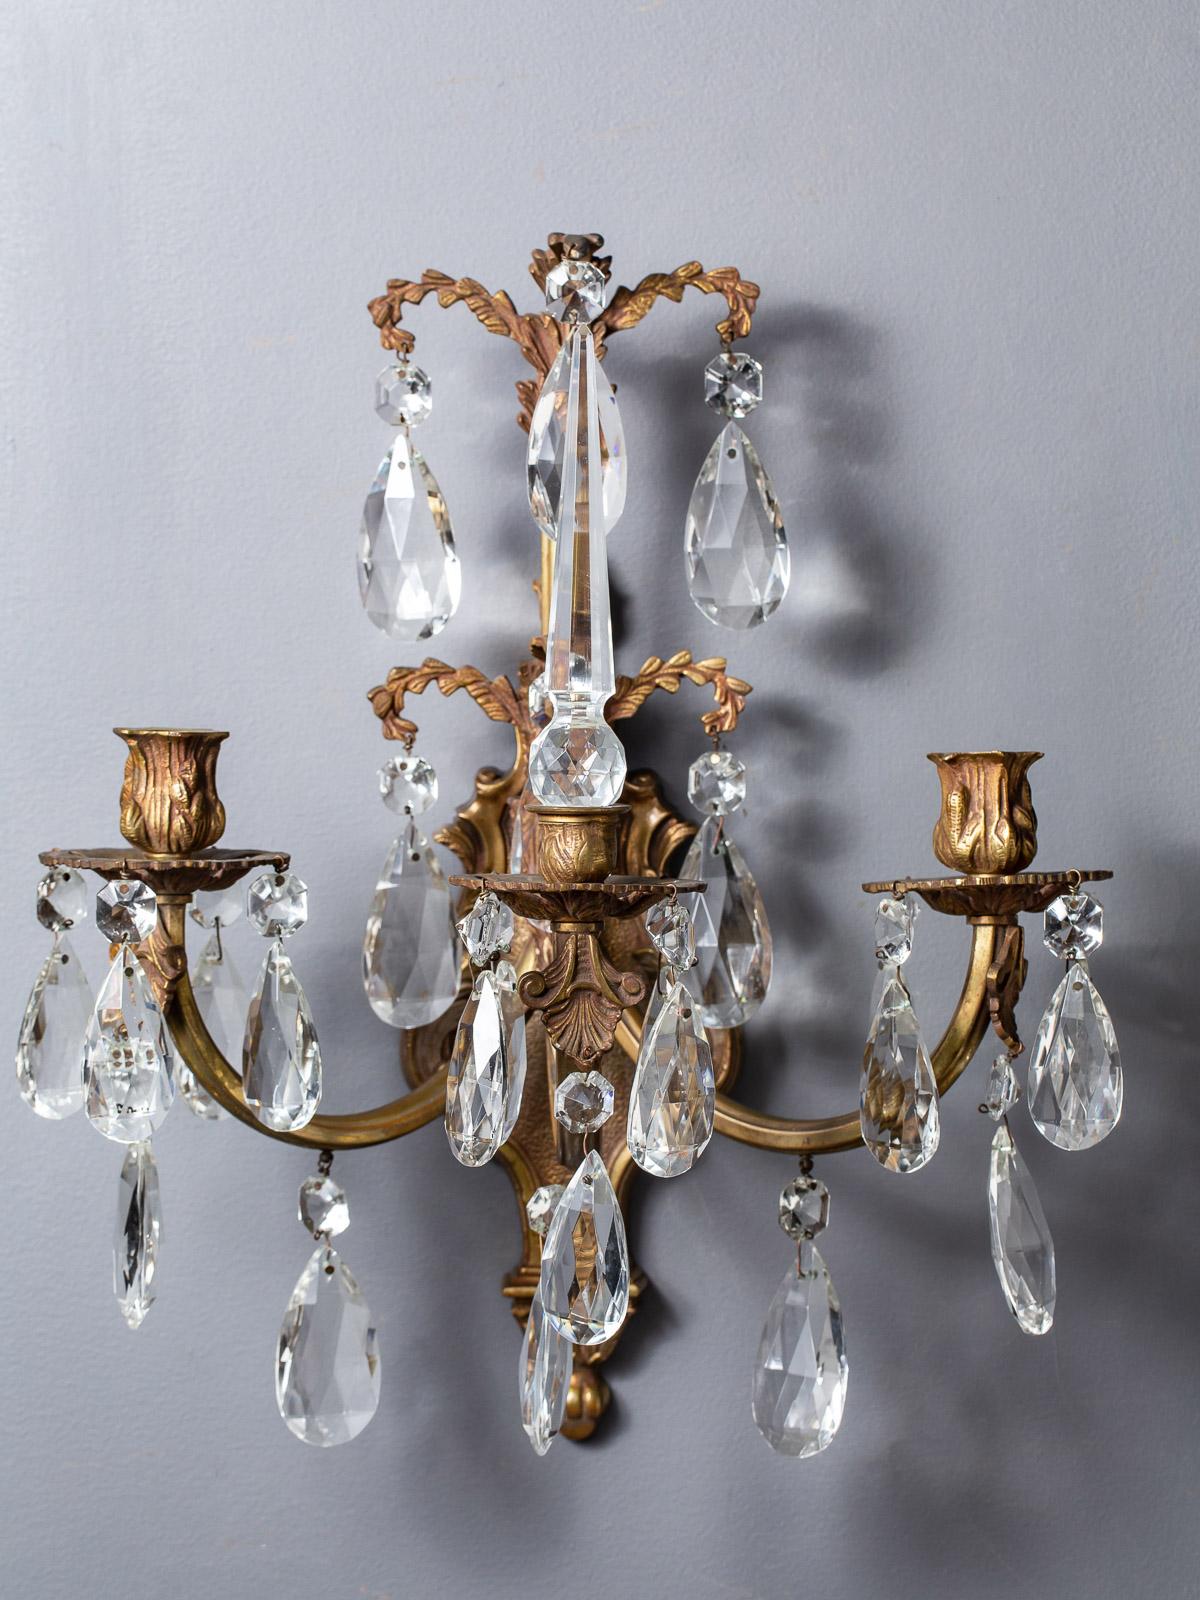 A pair of elegant three-arm vintage French brass and crystal sconces, circa 1940. These sconces have an important component referring the tall cut crystal spikes known as a 